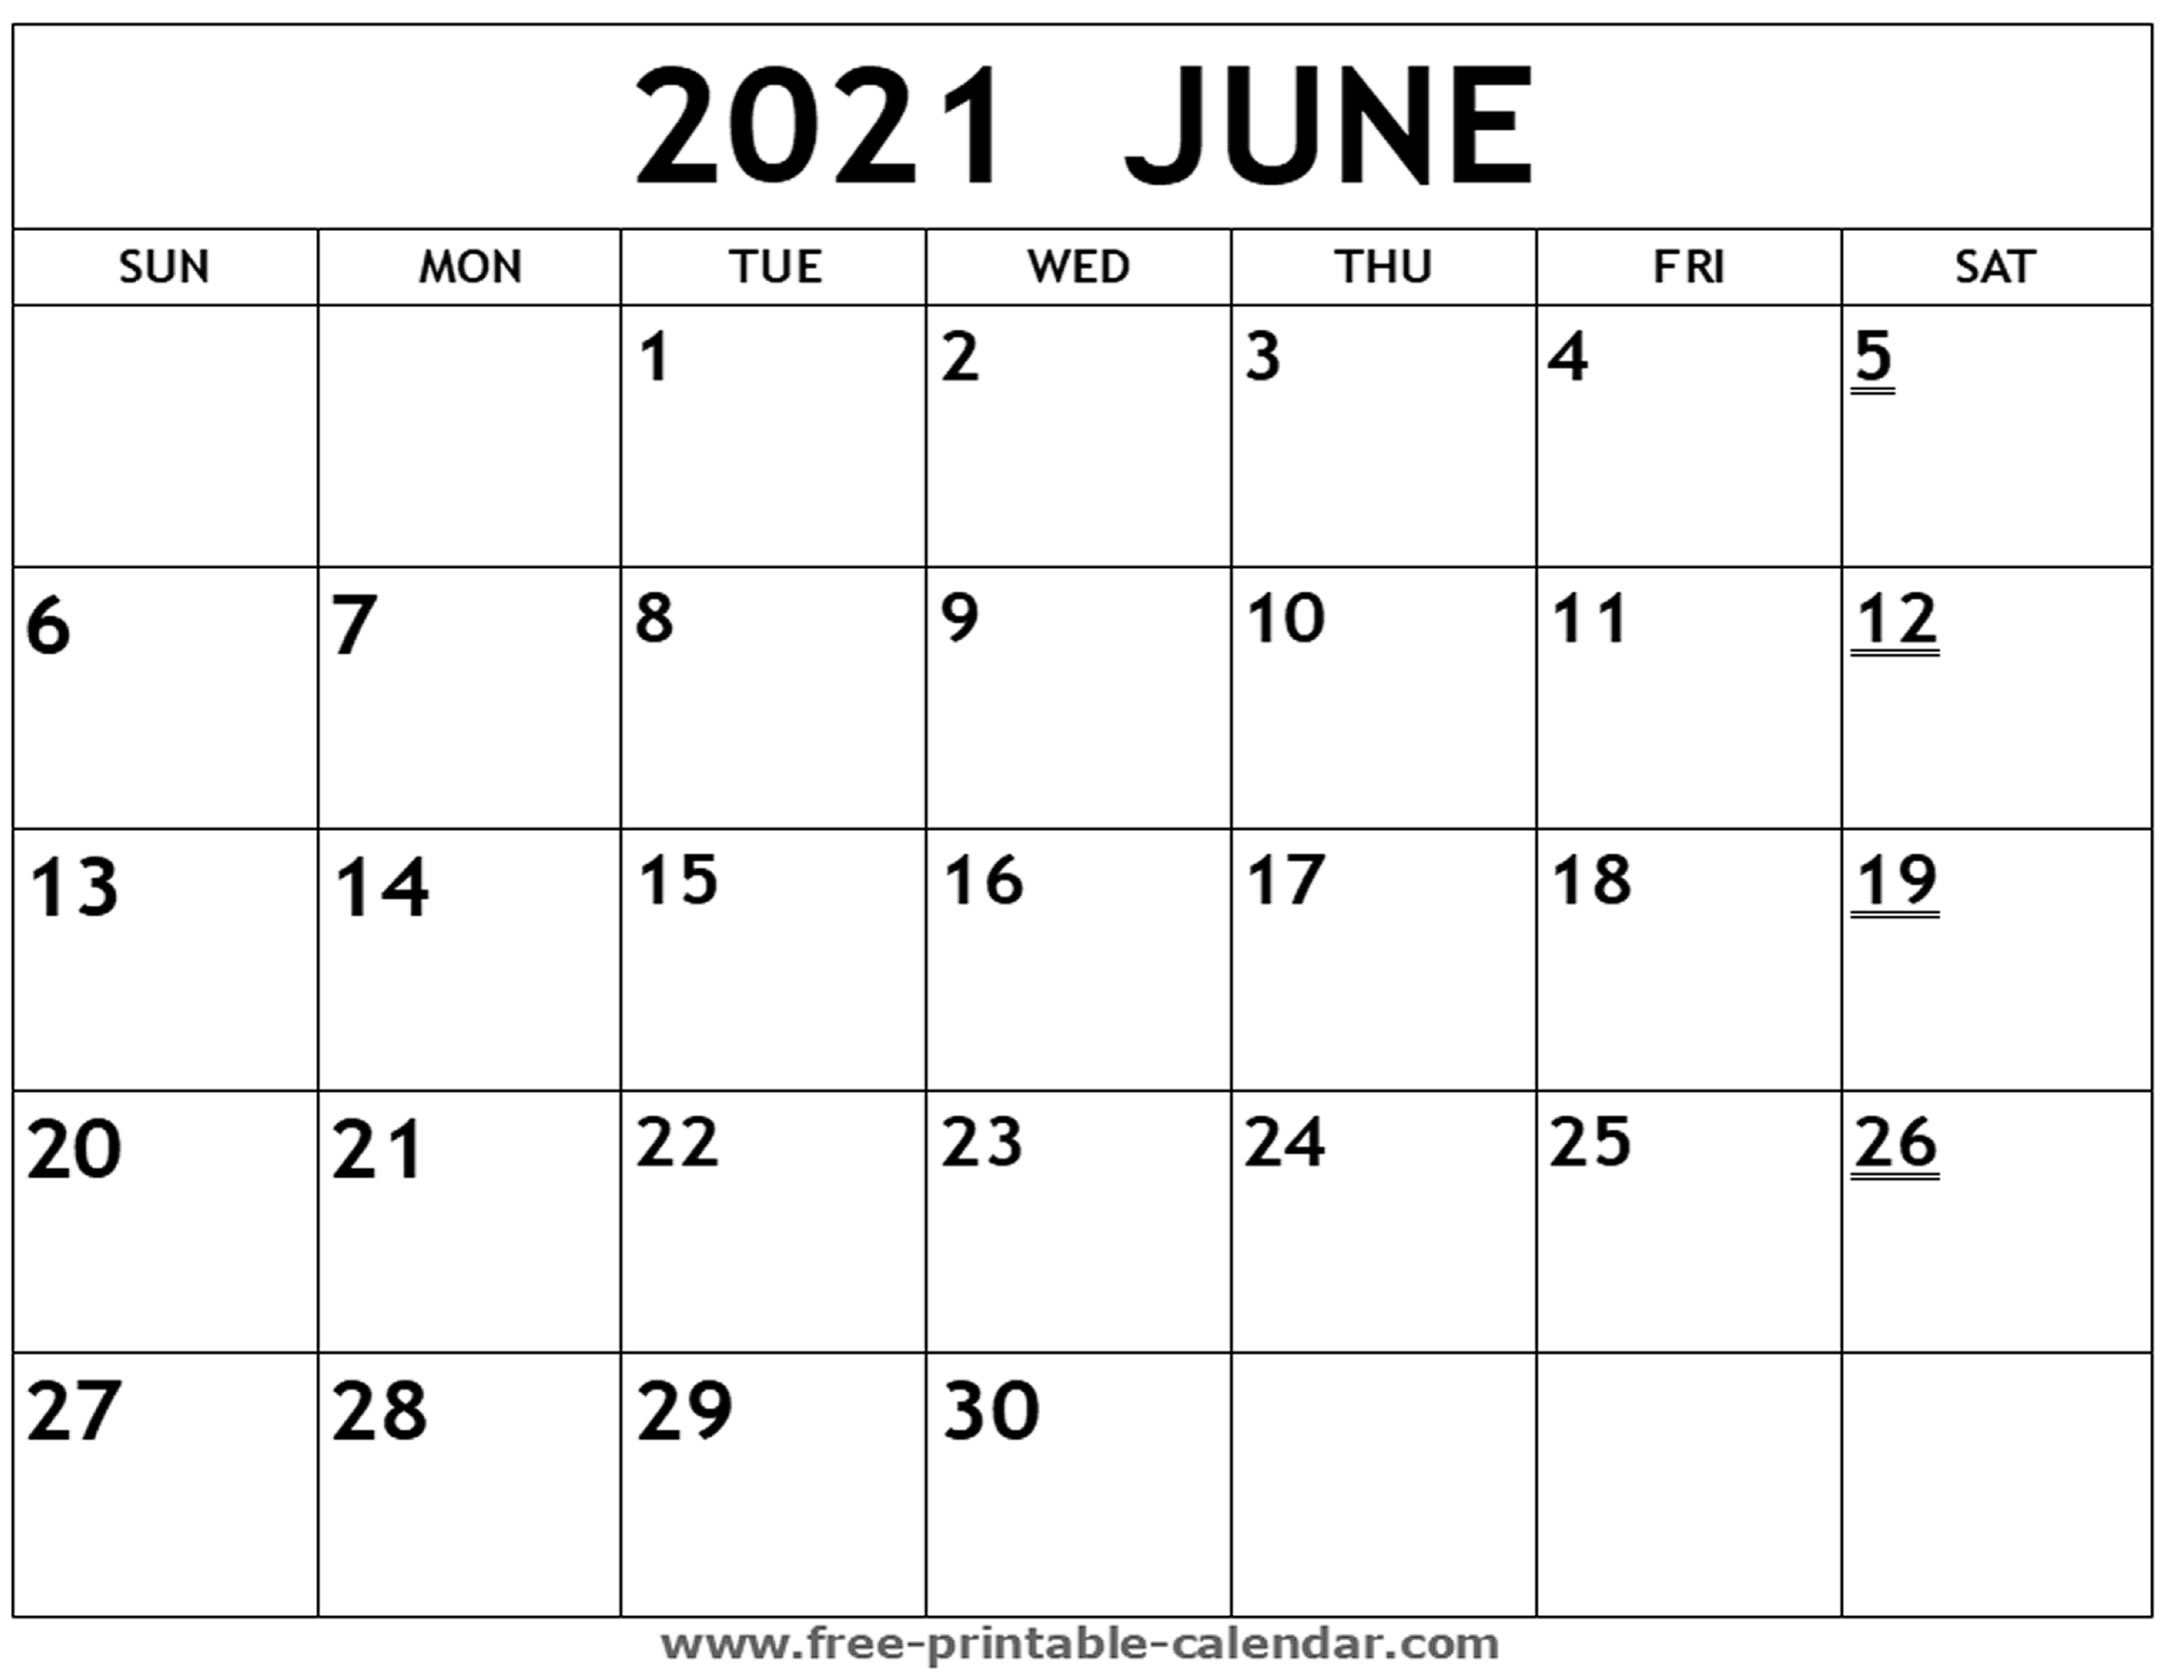 Pick Print Free 2021 Calendar Without Downloading